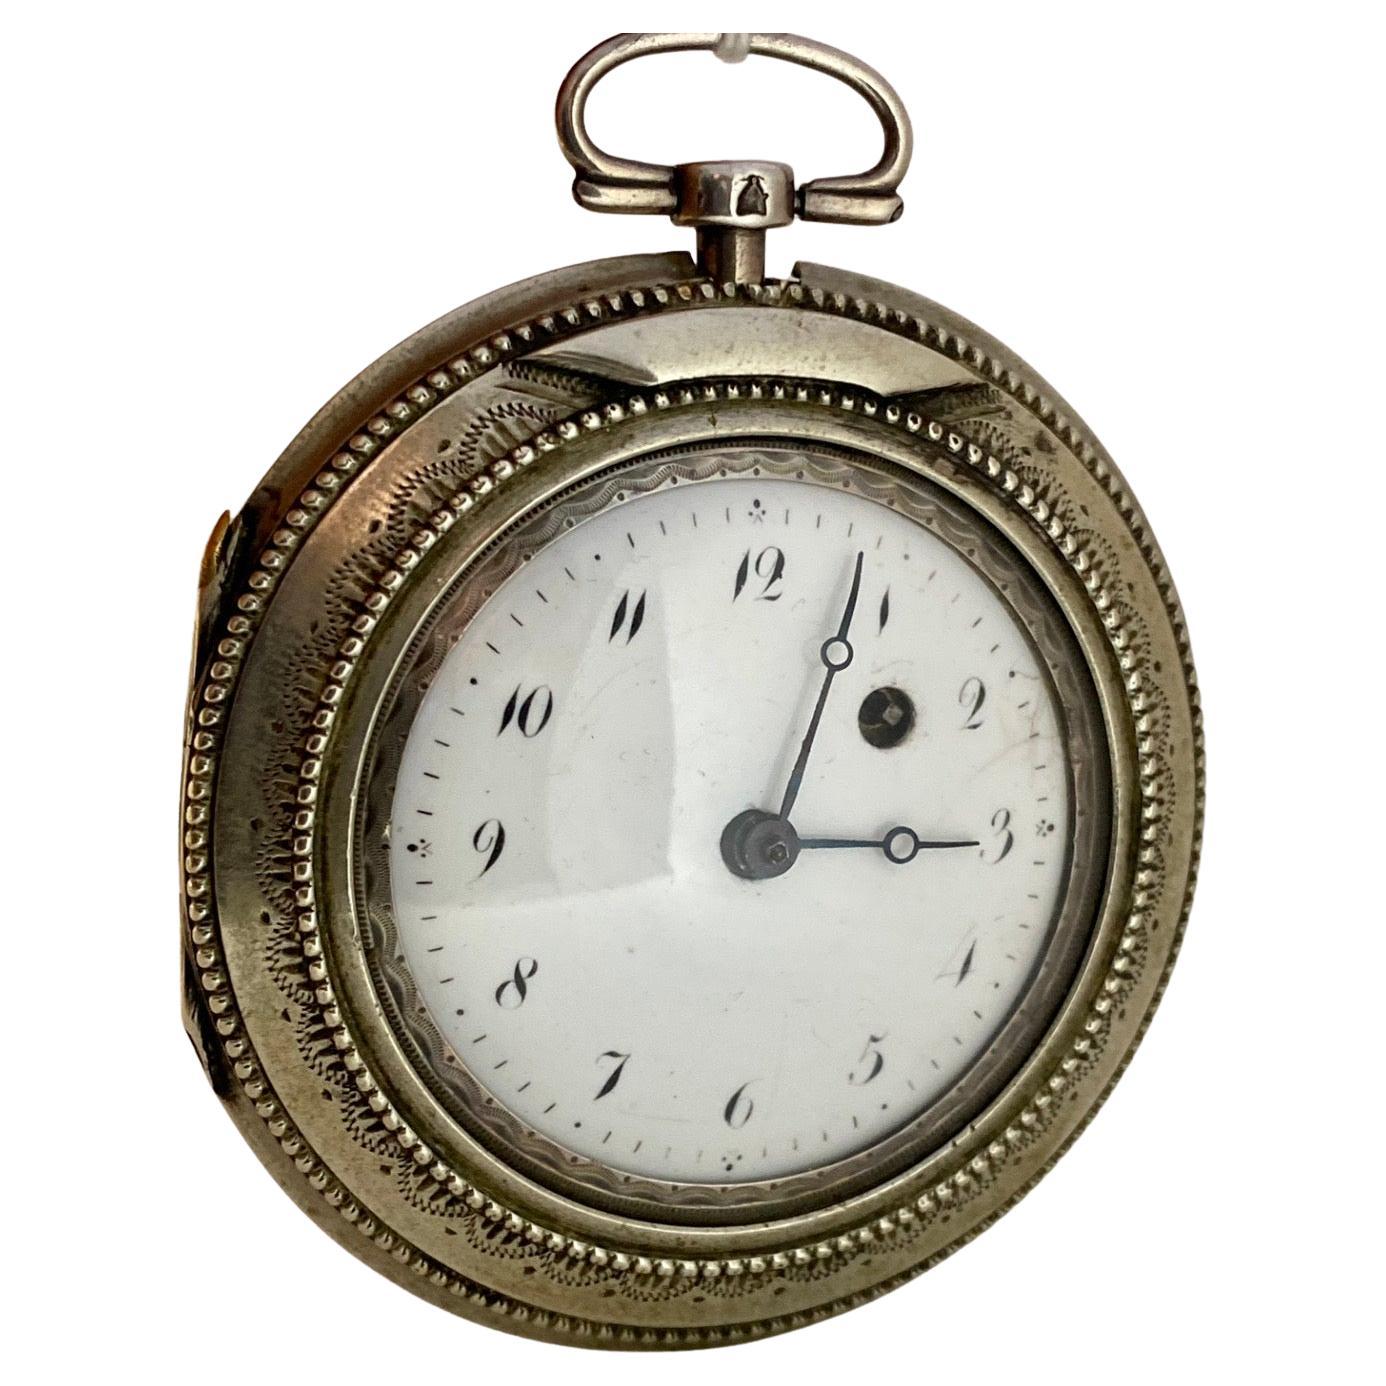 This beautiful antique pocket watch is in good working condition and it is running well. Visible signs of ageing and wear with some worn on the tortoise shell cases shown. Watch size is is 46mm diameter and case size is 65mm diameter. it comes with